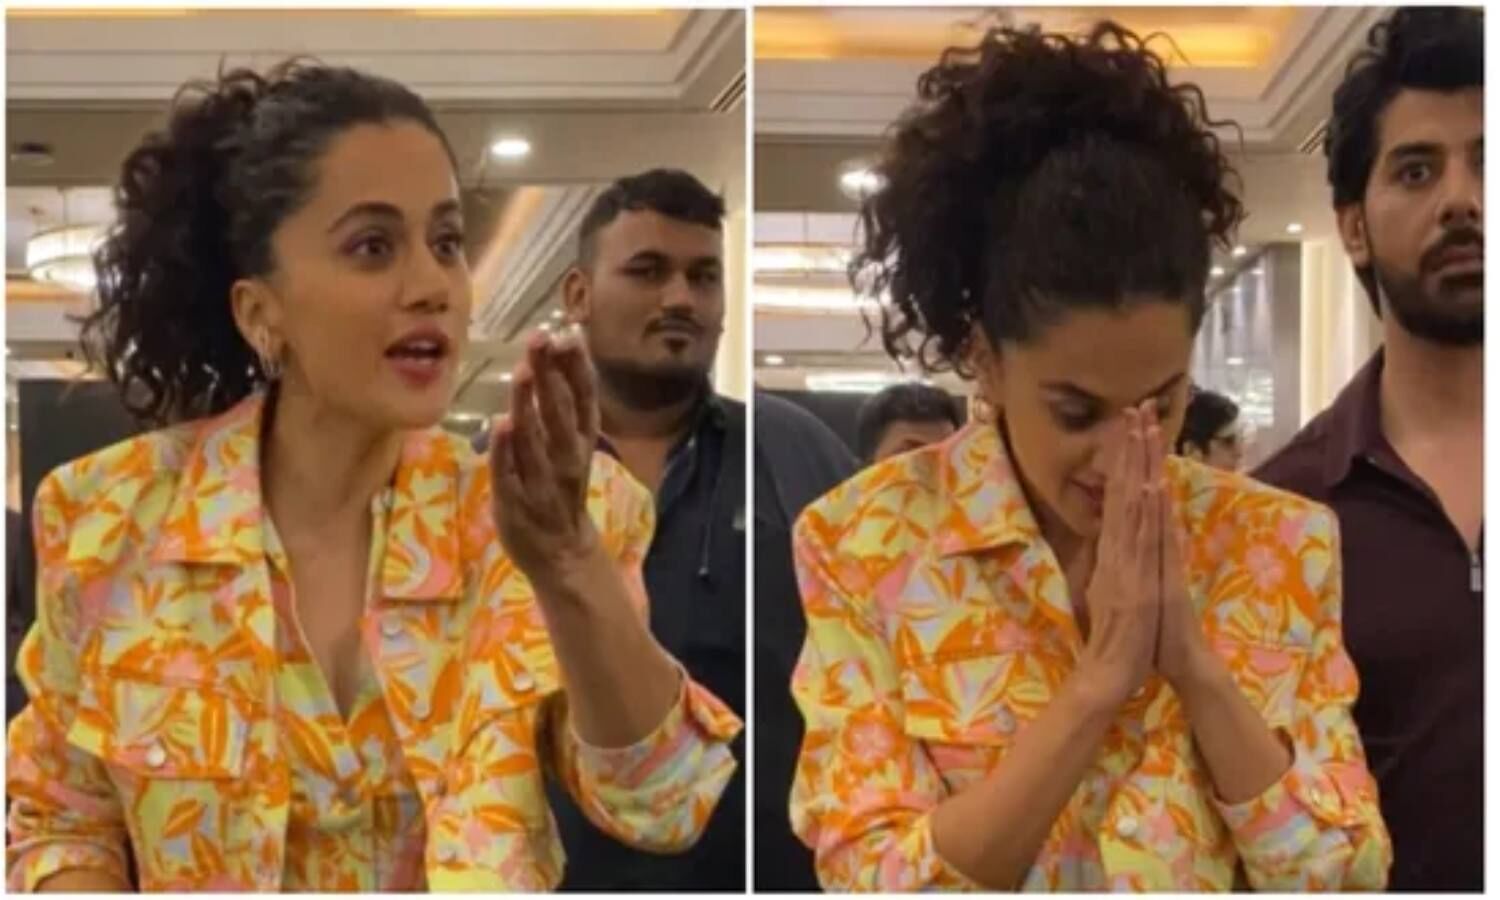 Taspsee Pannu Video: Taapsee Pannu debated during the promotion of the film ‘Do Bara’, said talk to me with respect